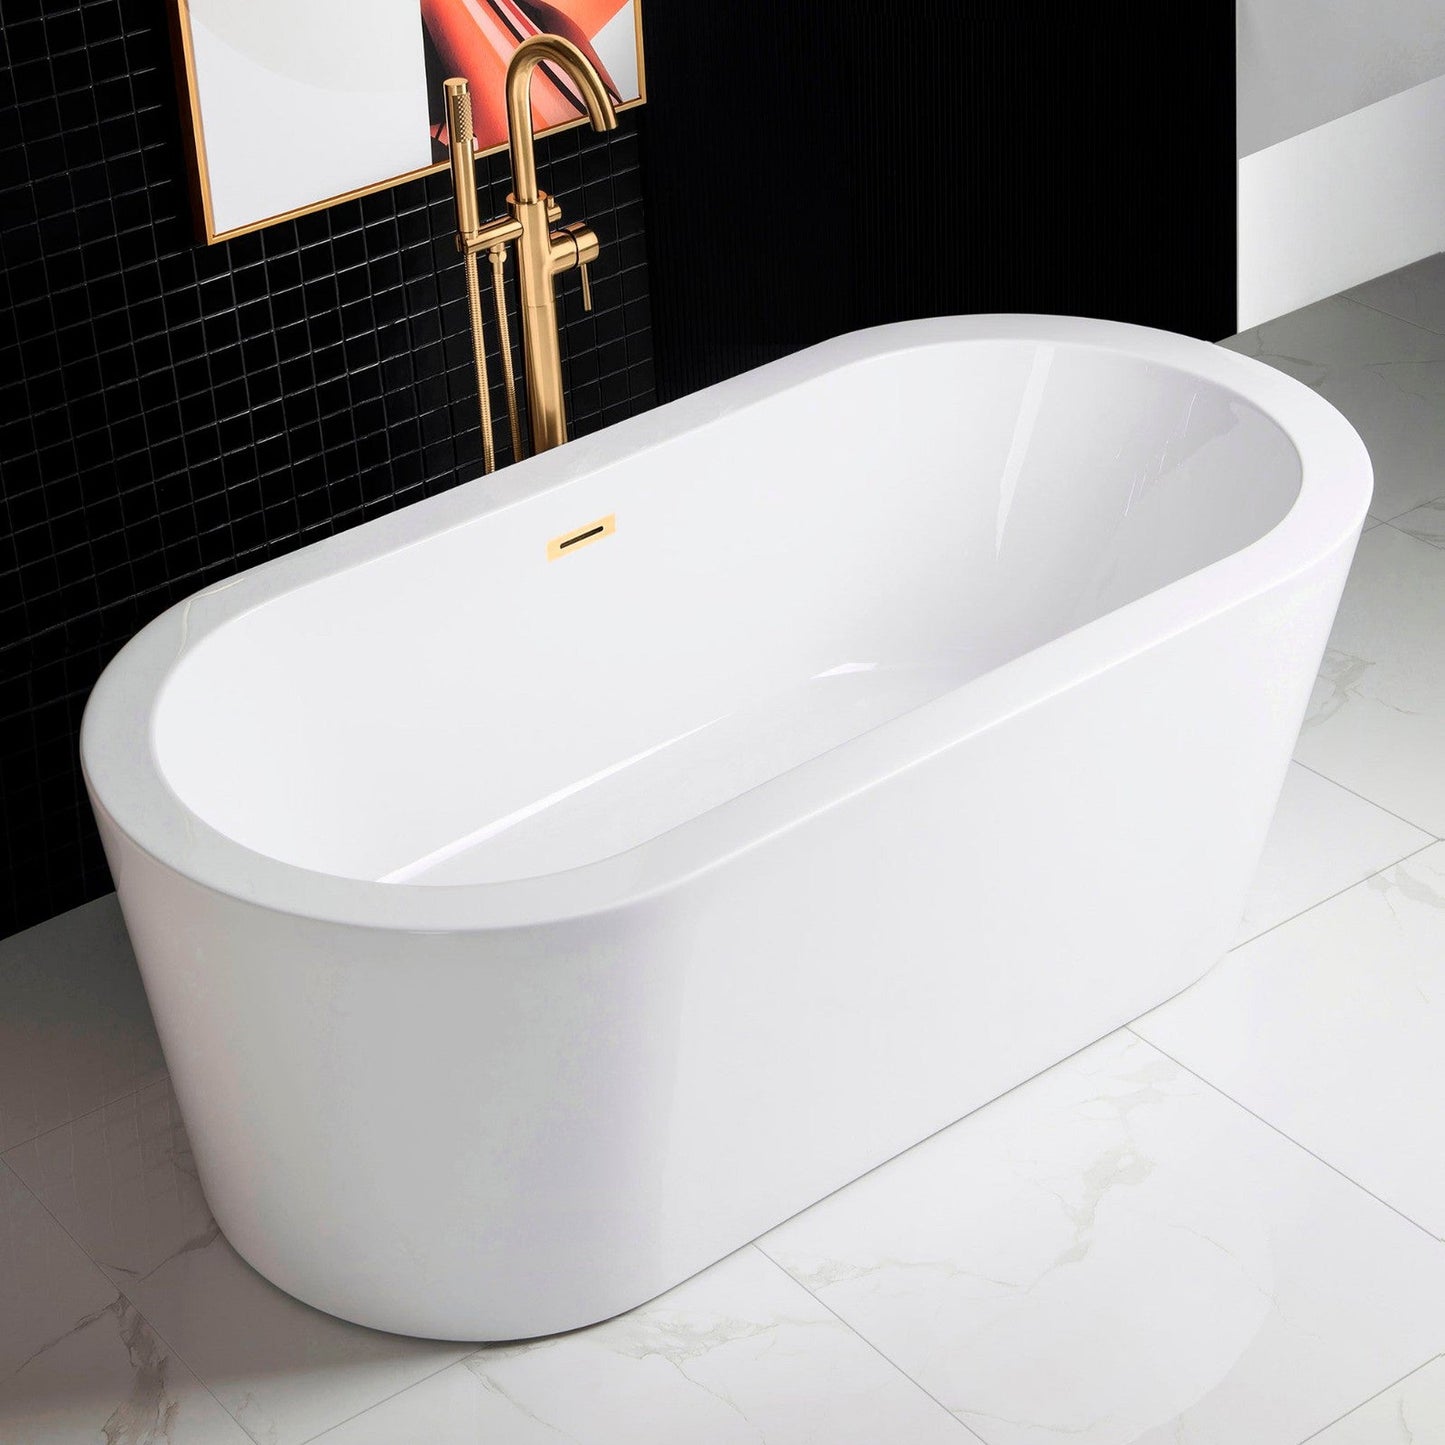 WoodBridge B0002 66" White Acrylic Freestanding Soaking Bathtub With Brushed Gold Drain, Overflow, F0073BGVT Tub Filler and Caddy Tray